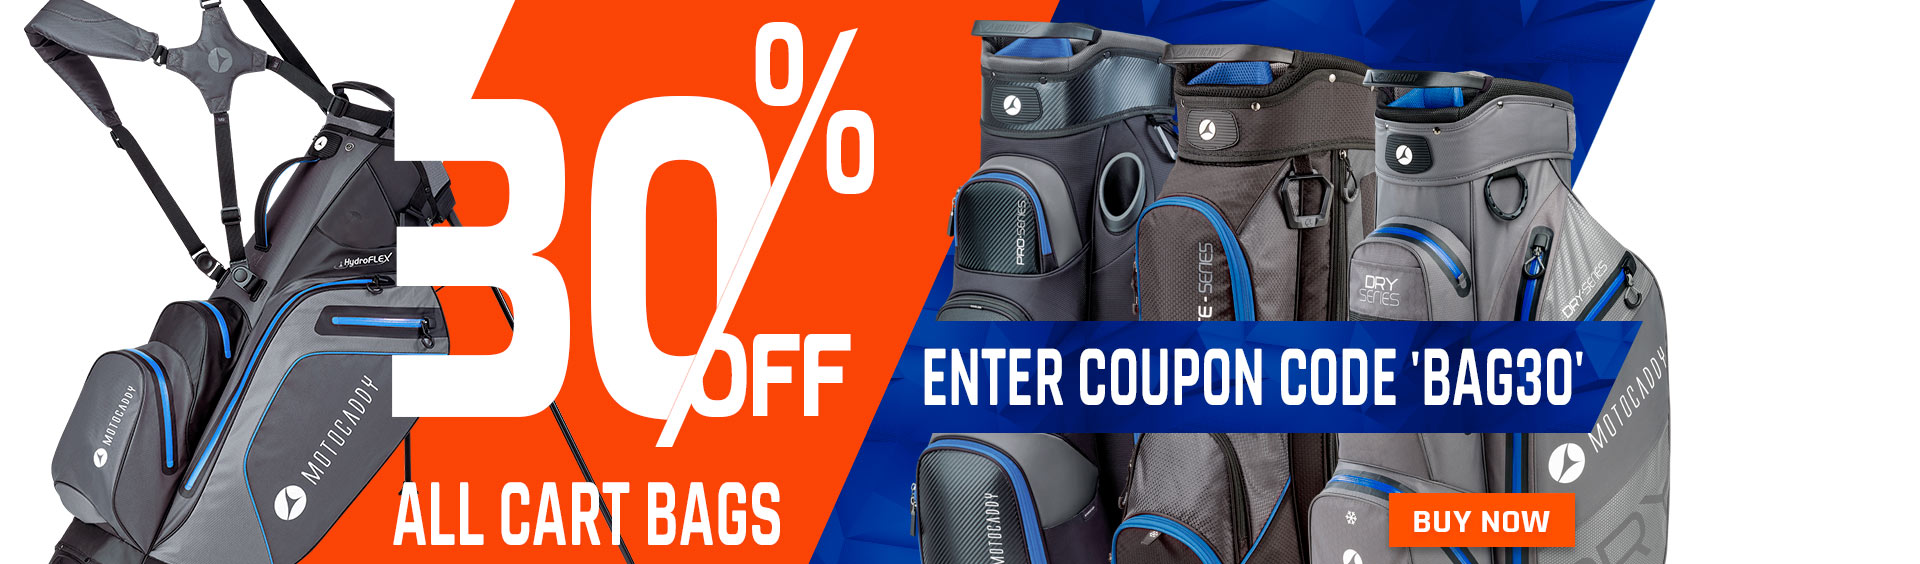 30% Off All Cart Bags